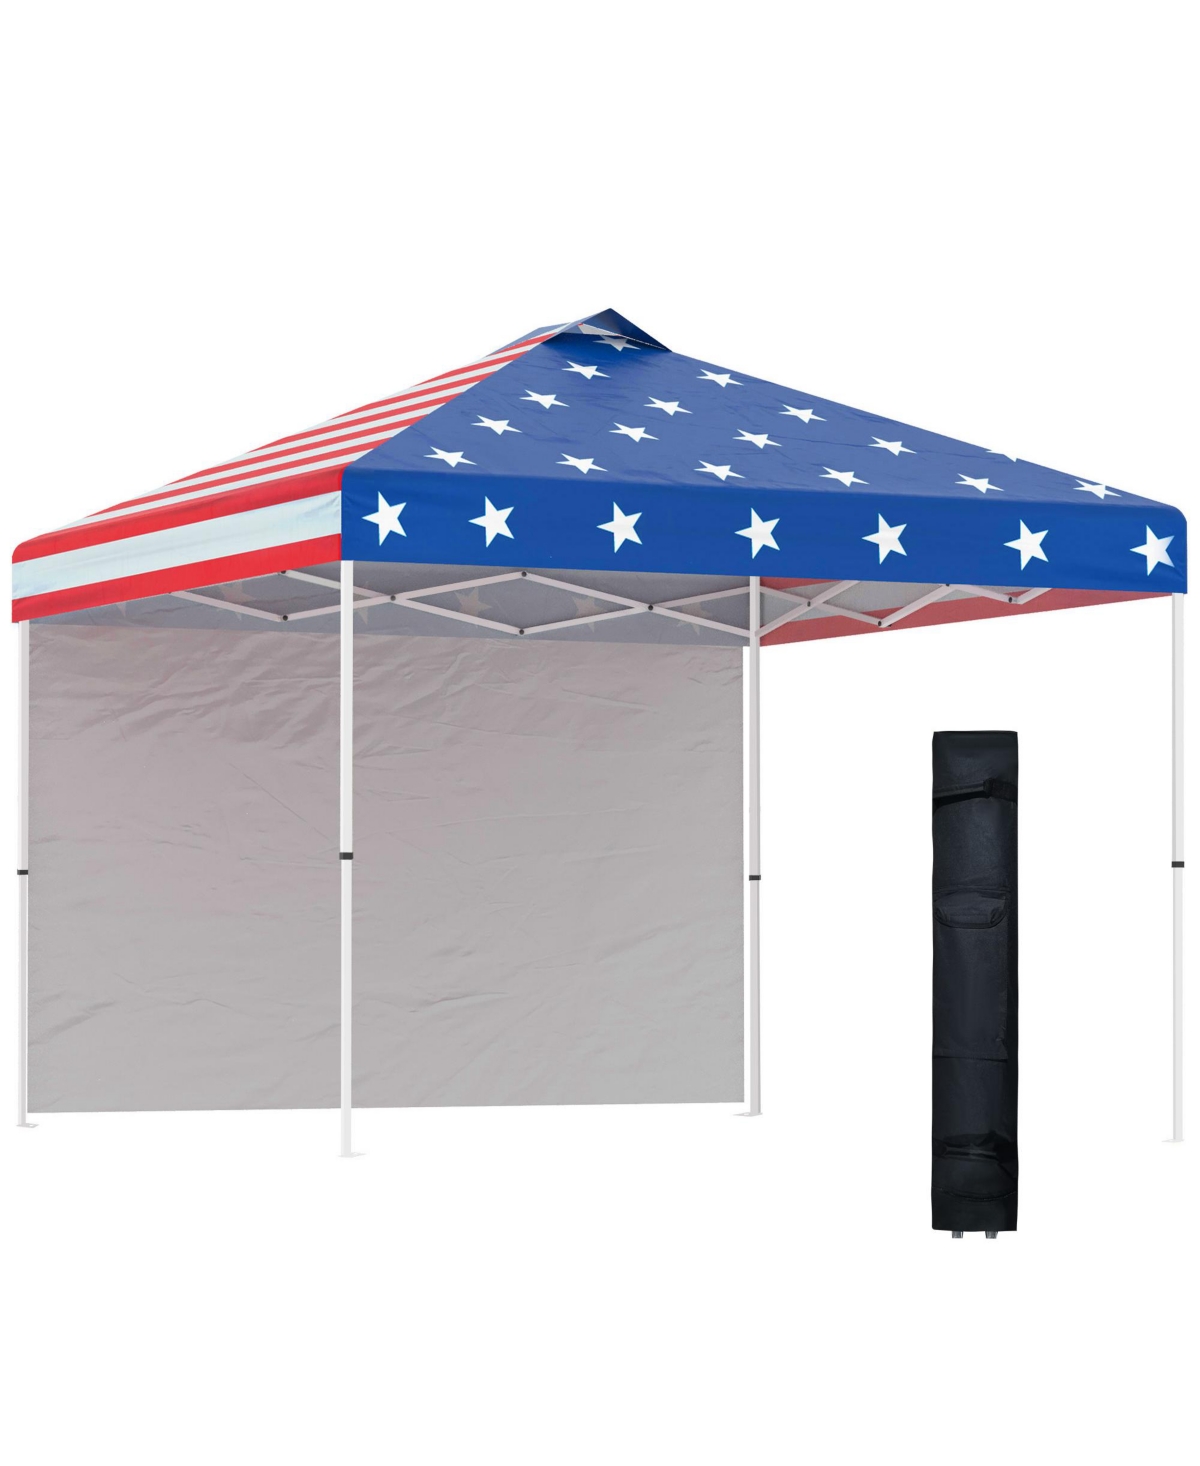 10' Pop-Up Canopy Party Tent with 1 Sidewall, Rolling Carry Bag on Wheels, Adjustable Height, Folding Outdoor Shelter, Multicolored - Blue